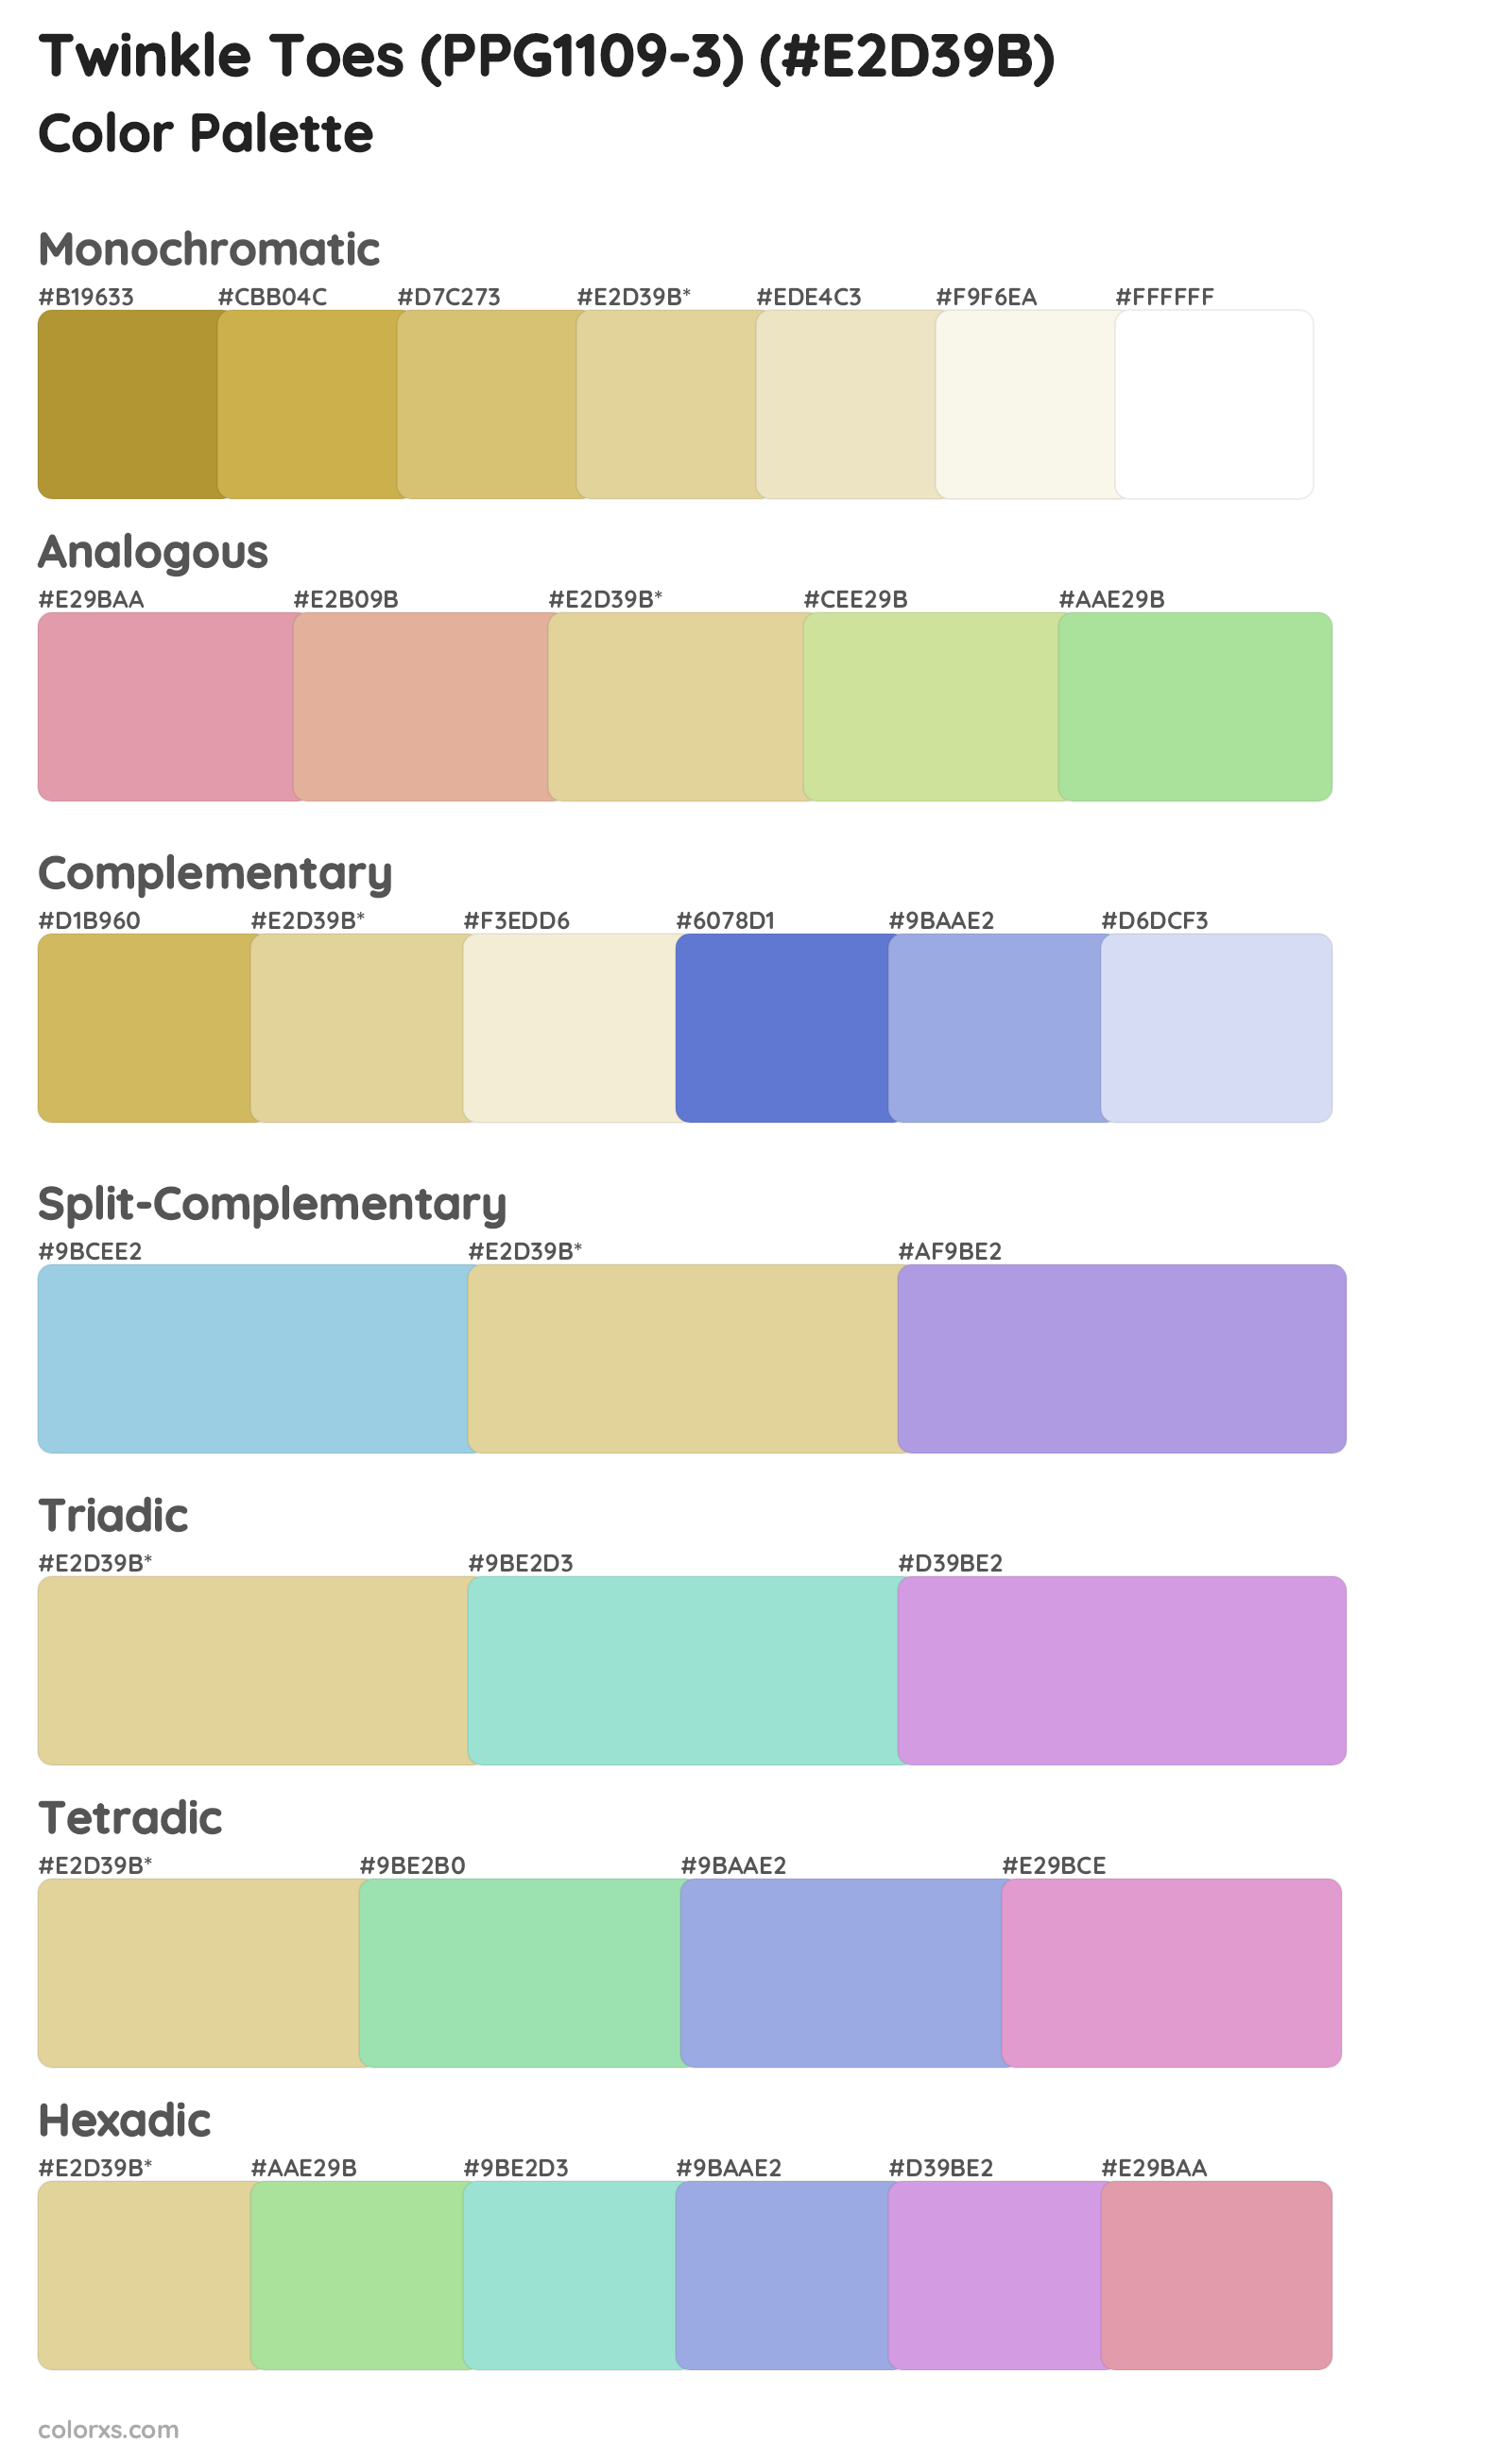 Twinkle Toes (PPG1109-3) Color Scheme Palettes